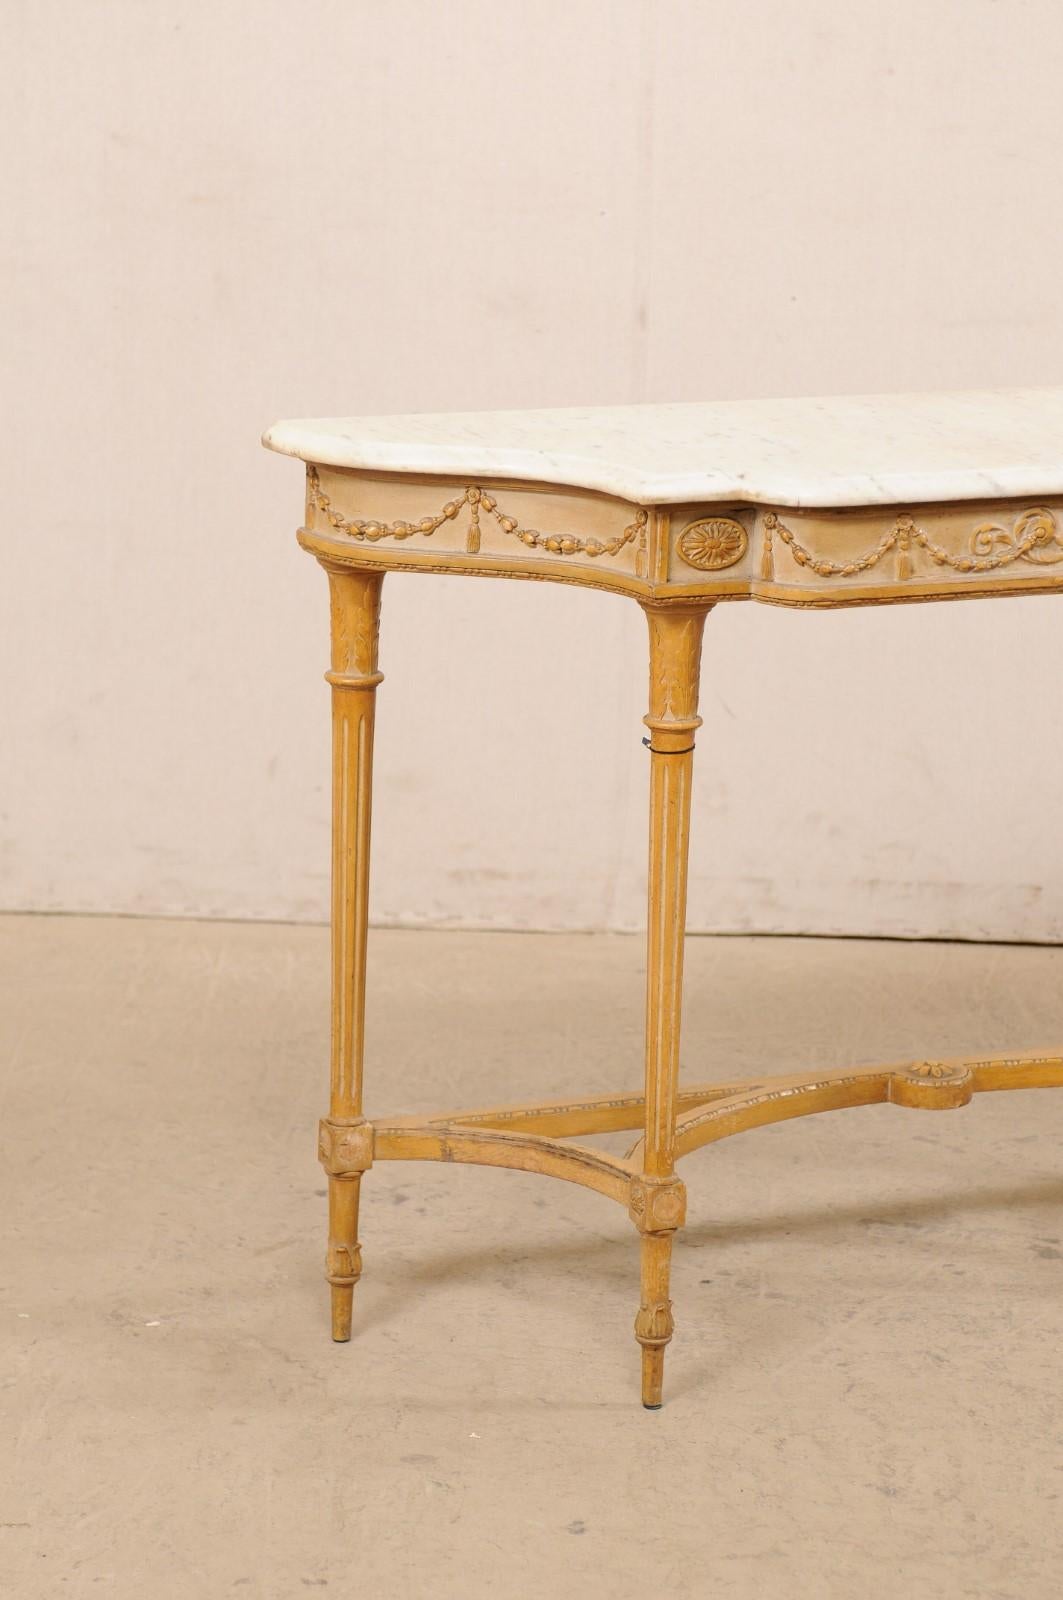 20th Century French Marble Top Console Table w/ Neoclassical Style Carvings & Fluted Legs